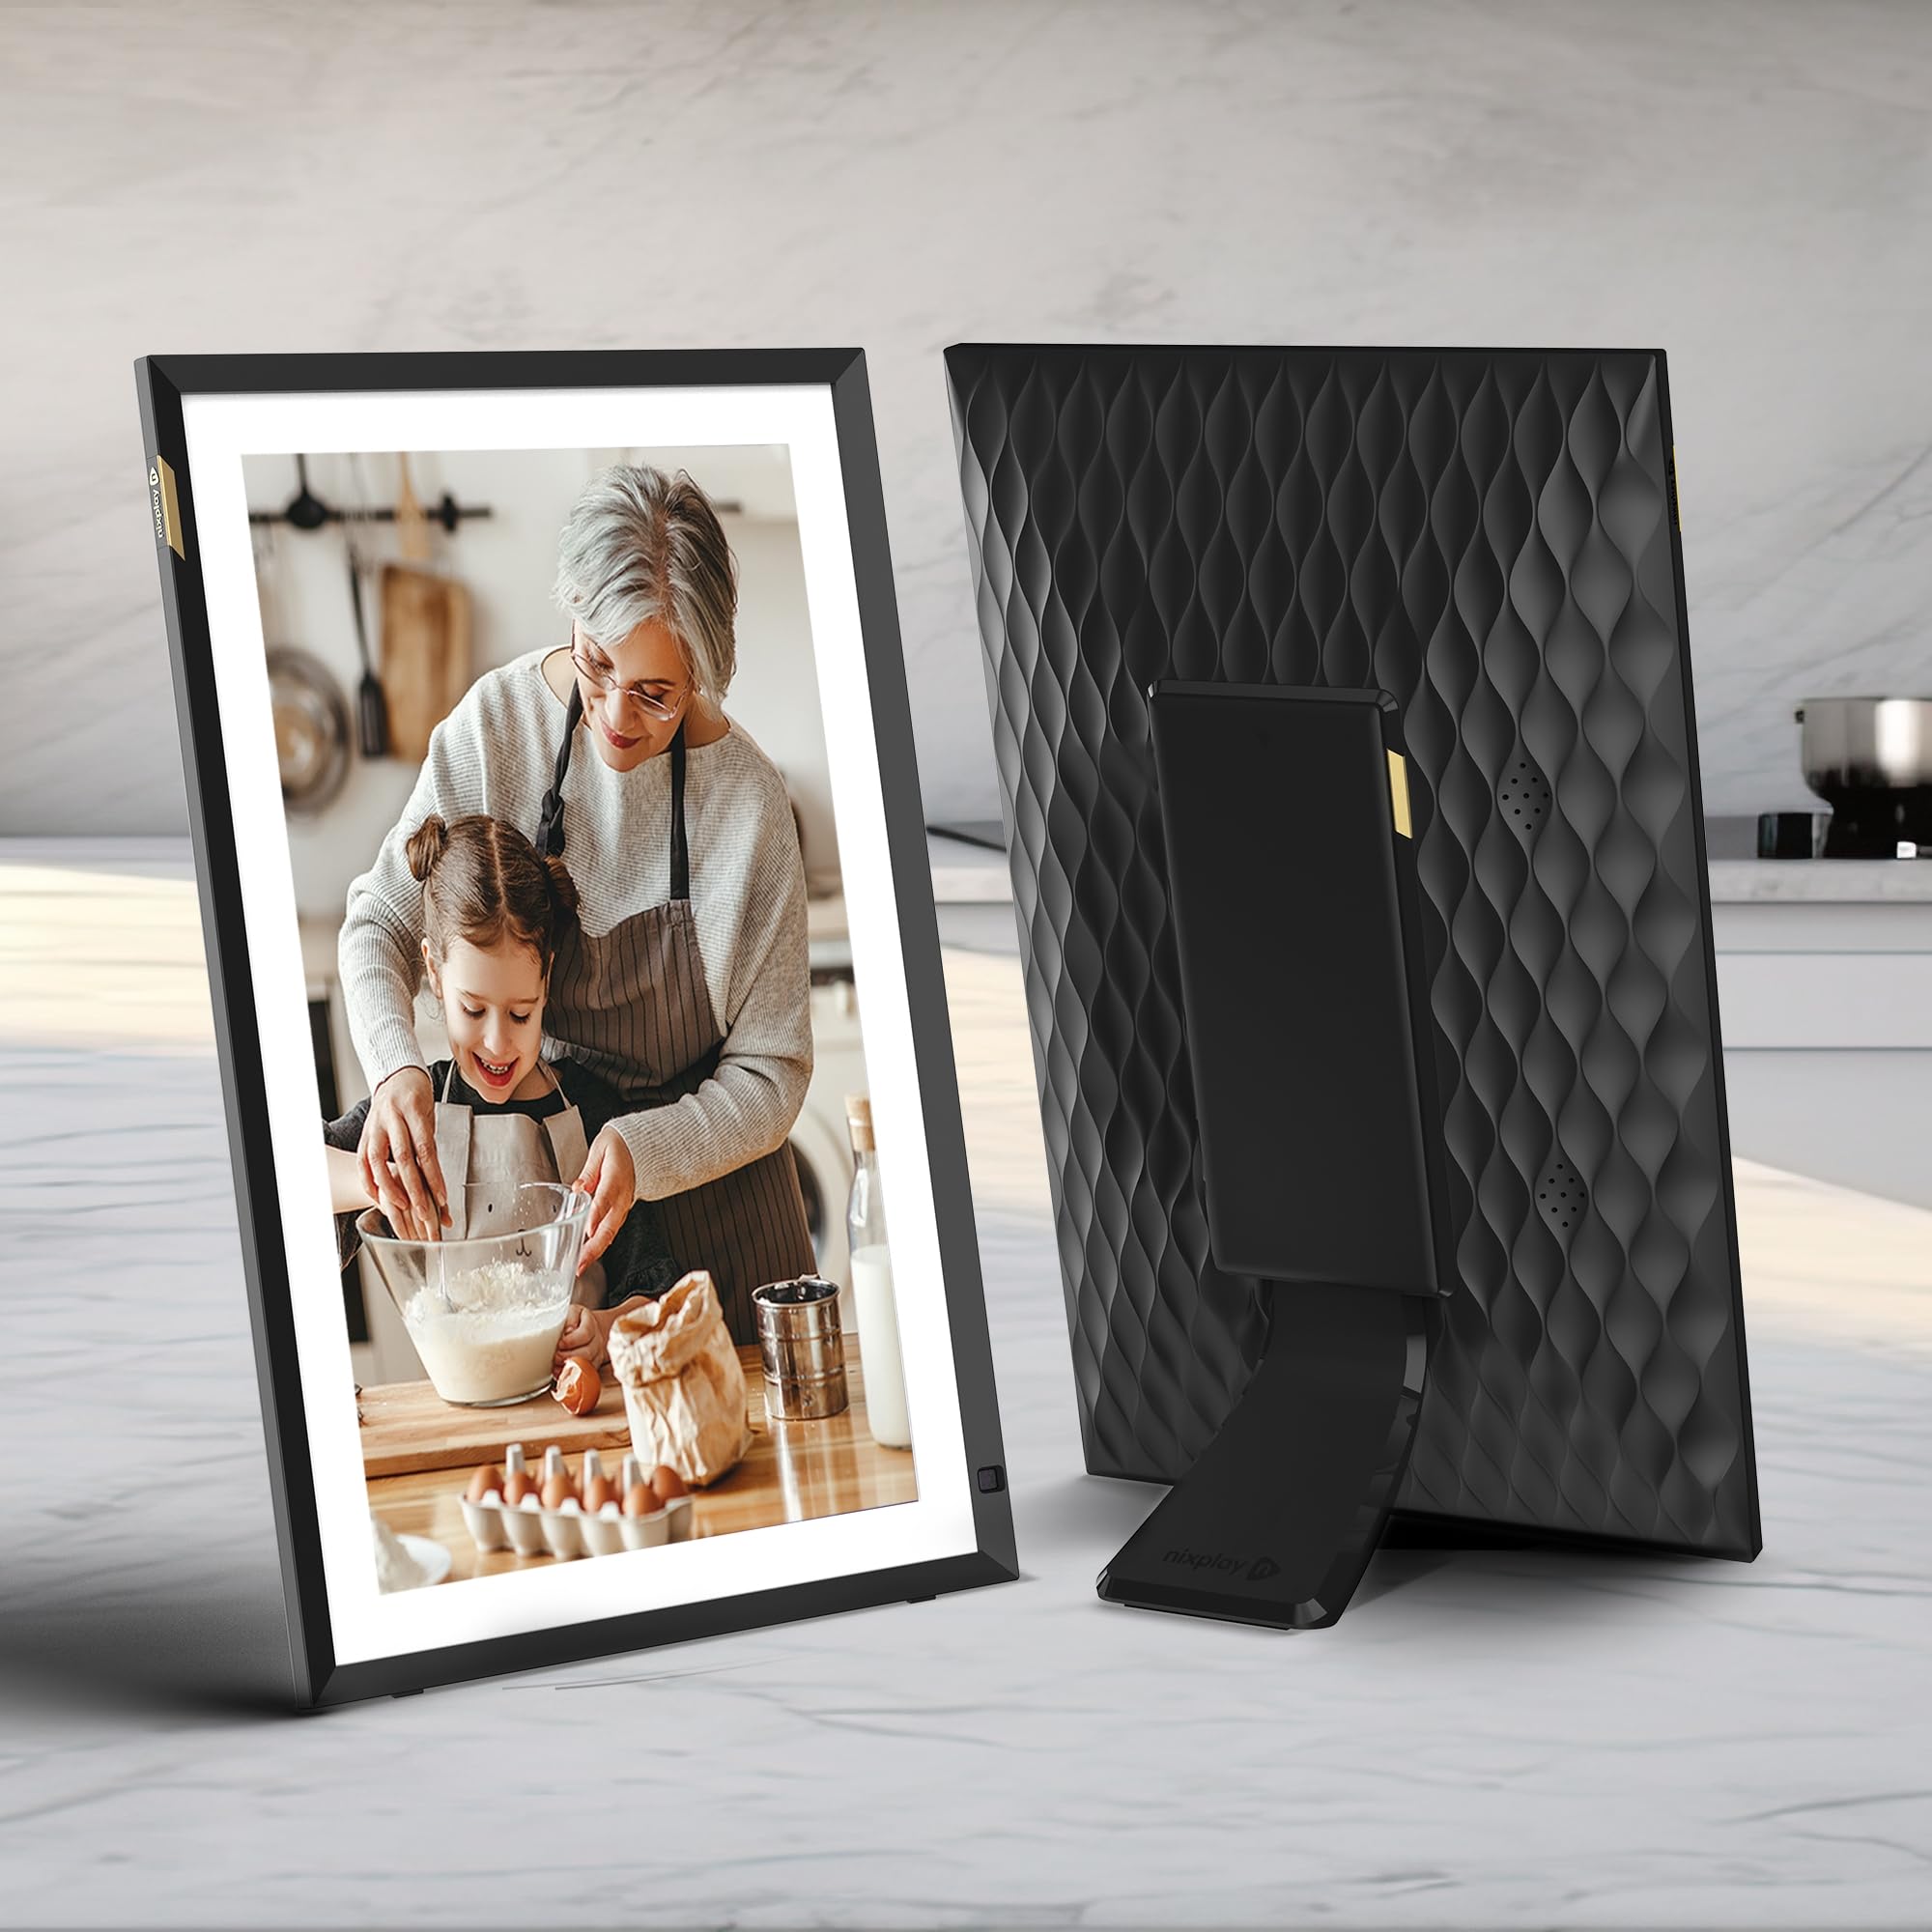 Nixplay Digital Touch Screen Picture Frame - 15.6” Photo Frame, Connecting Families & Friends (Black/White Matte)